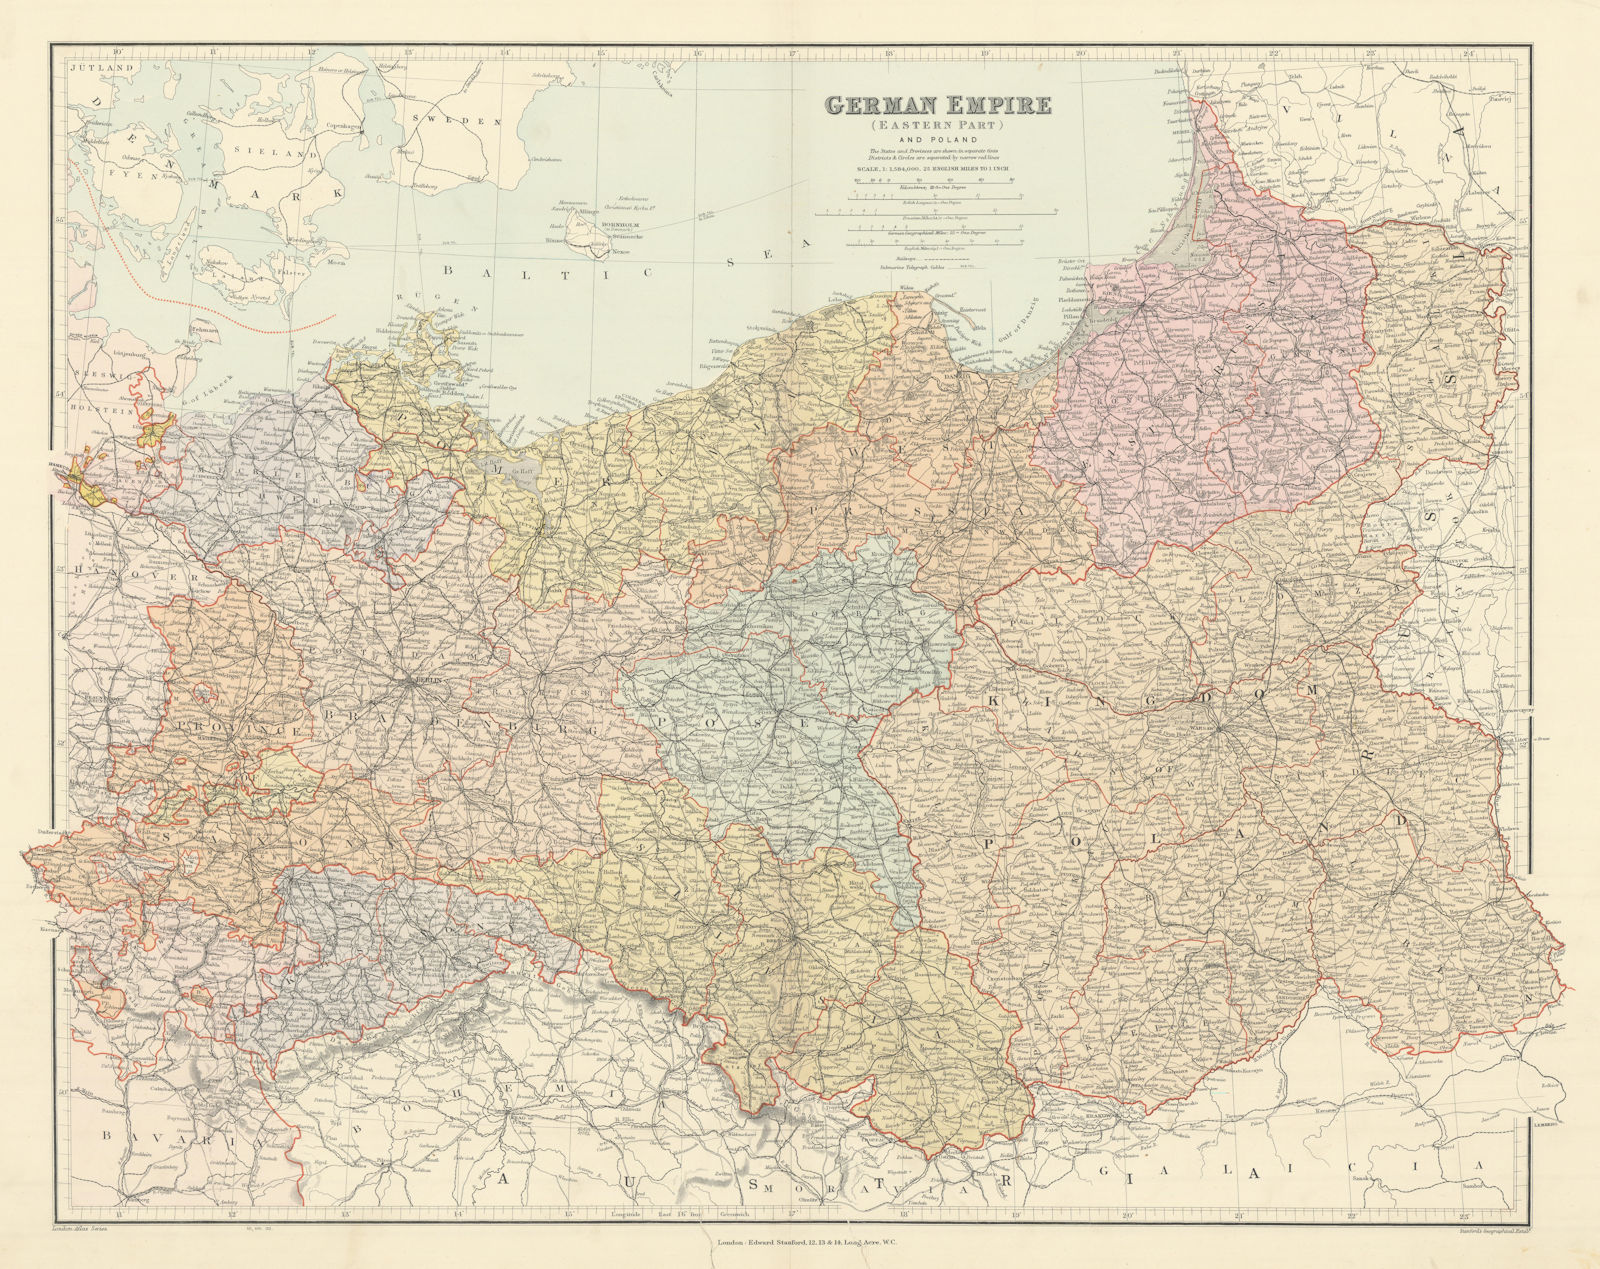 Associate Product German Empire (eastern part) and Poland. Large 66x52cm. STANFORD 1904 old map